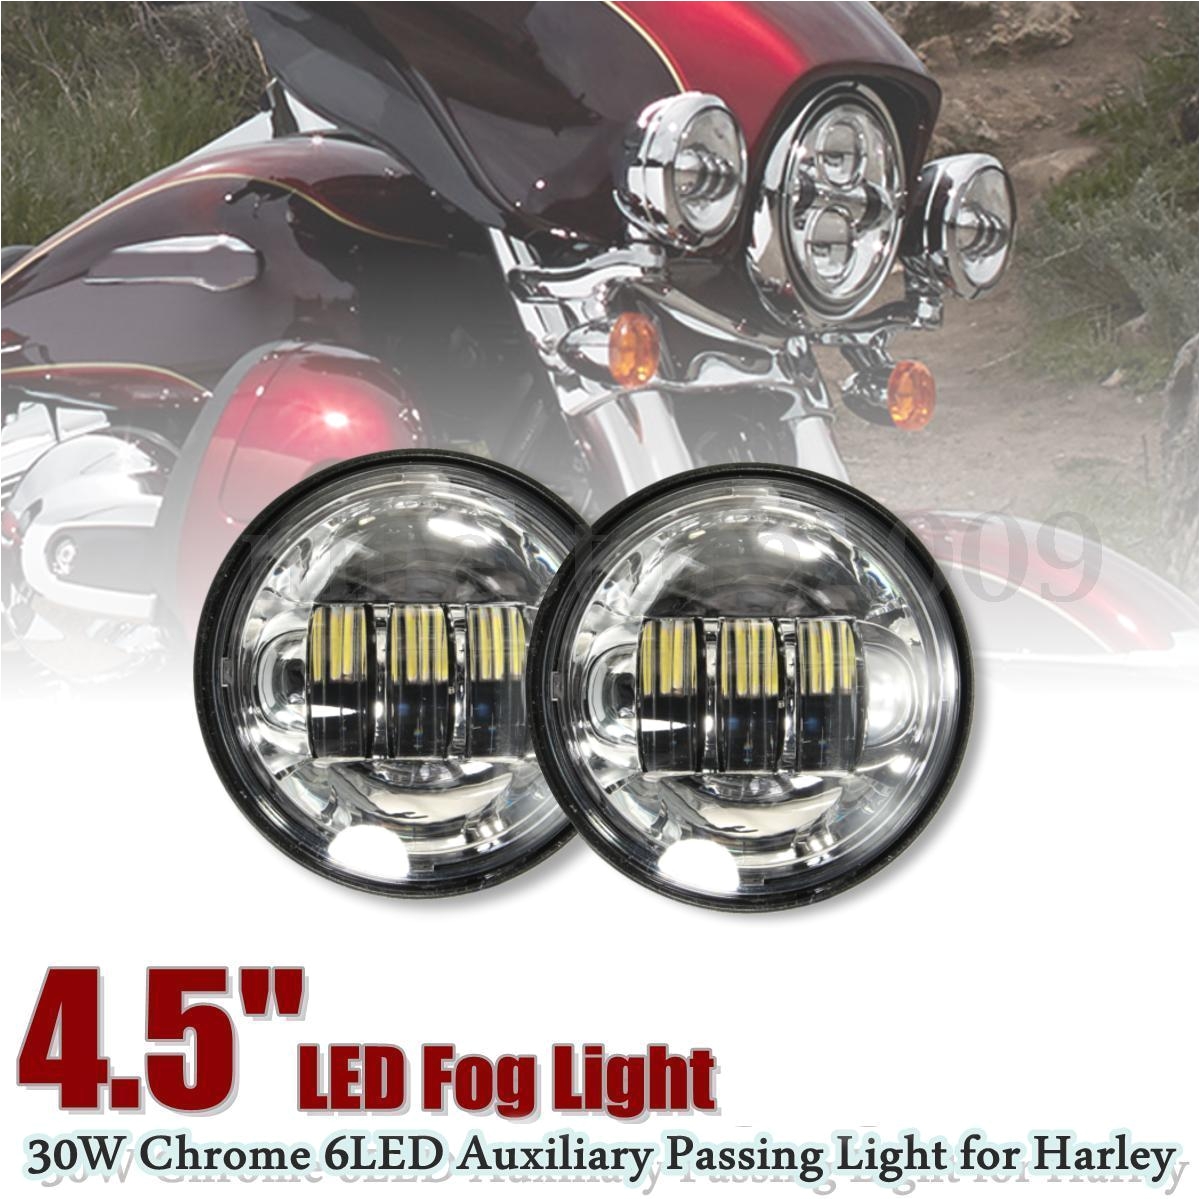 2018 4 5inch cree led motorcycle fog light kit work driving lamp 4 1 2 chrome led auxiliary spot fog passing lamp for harley motorcycle from